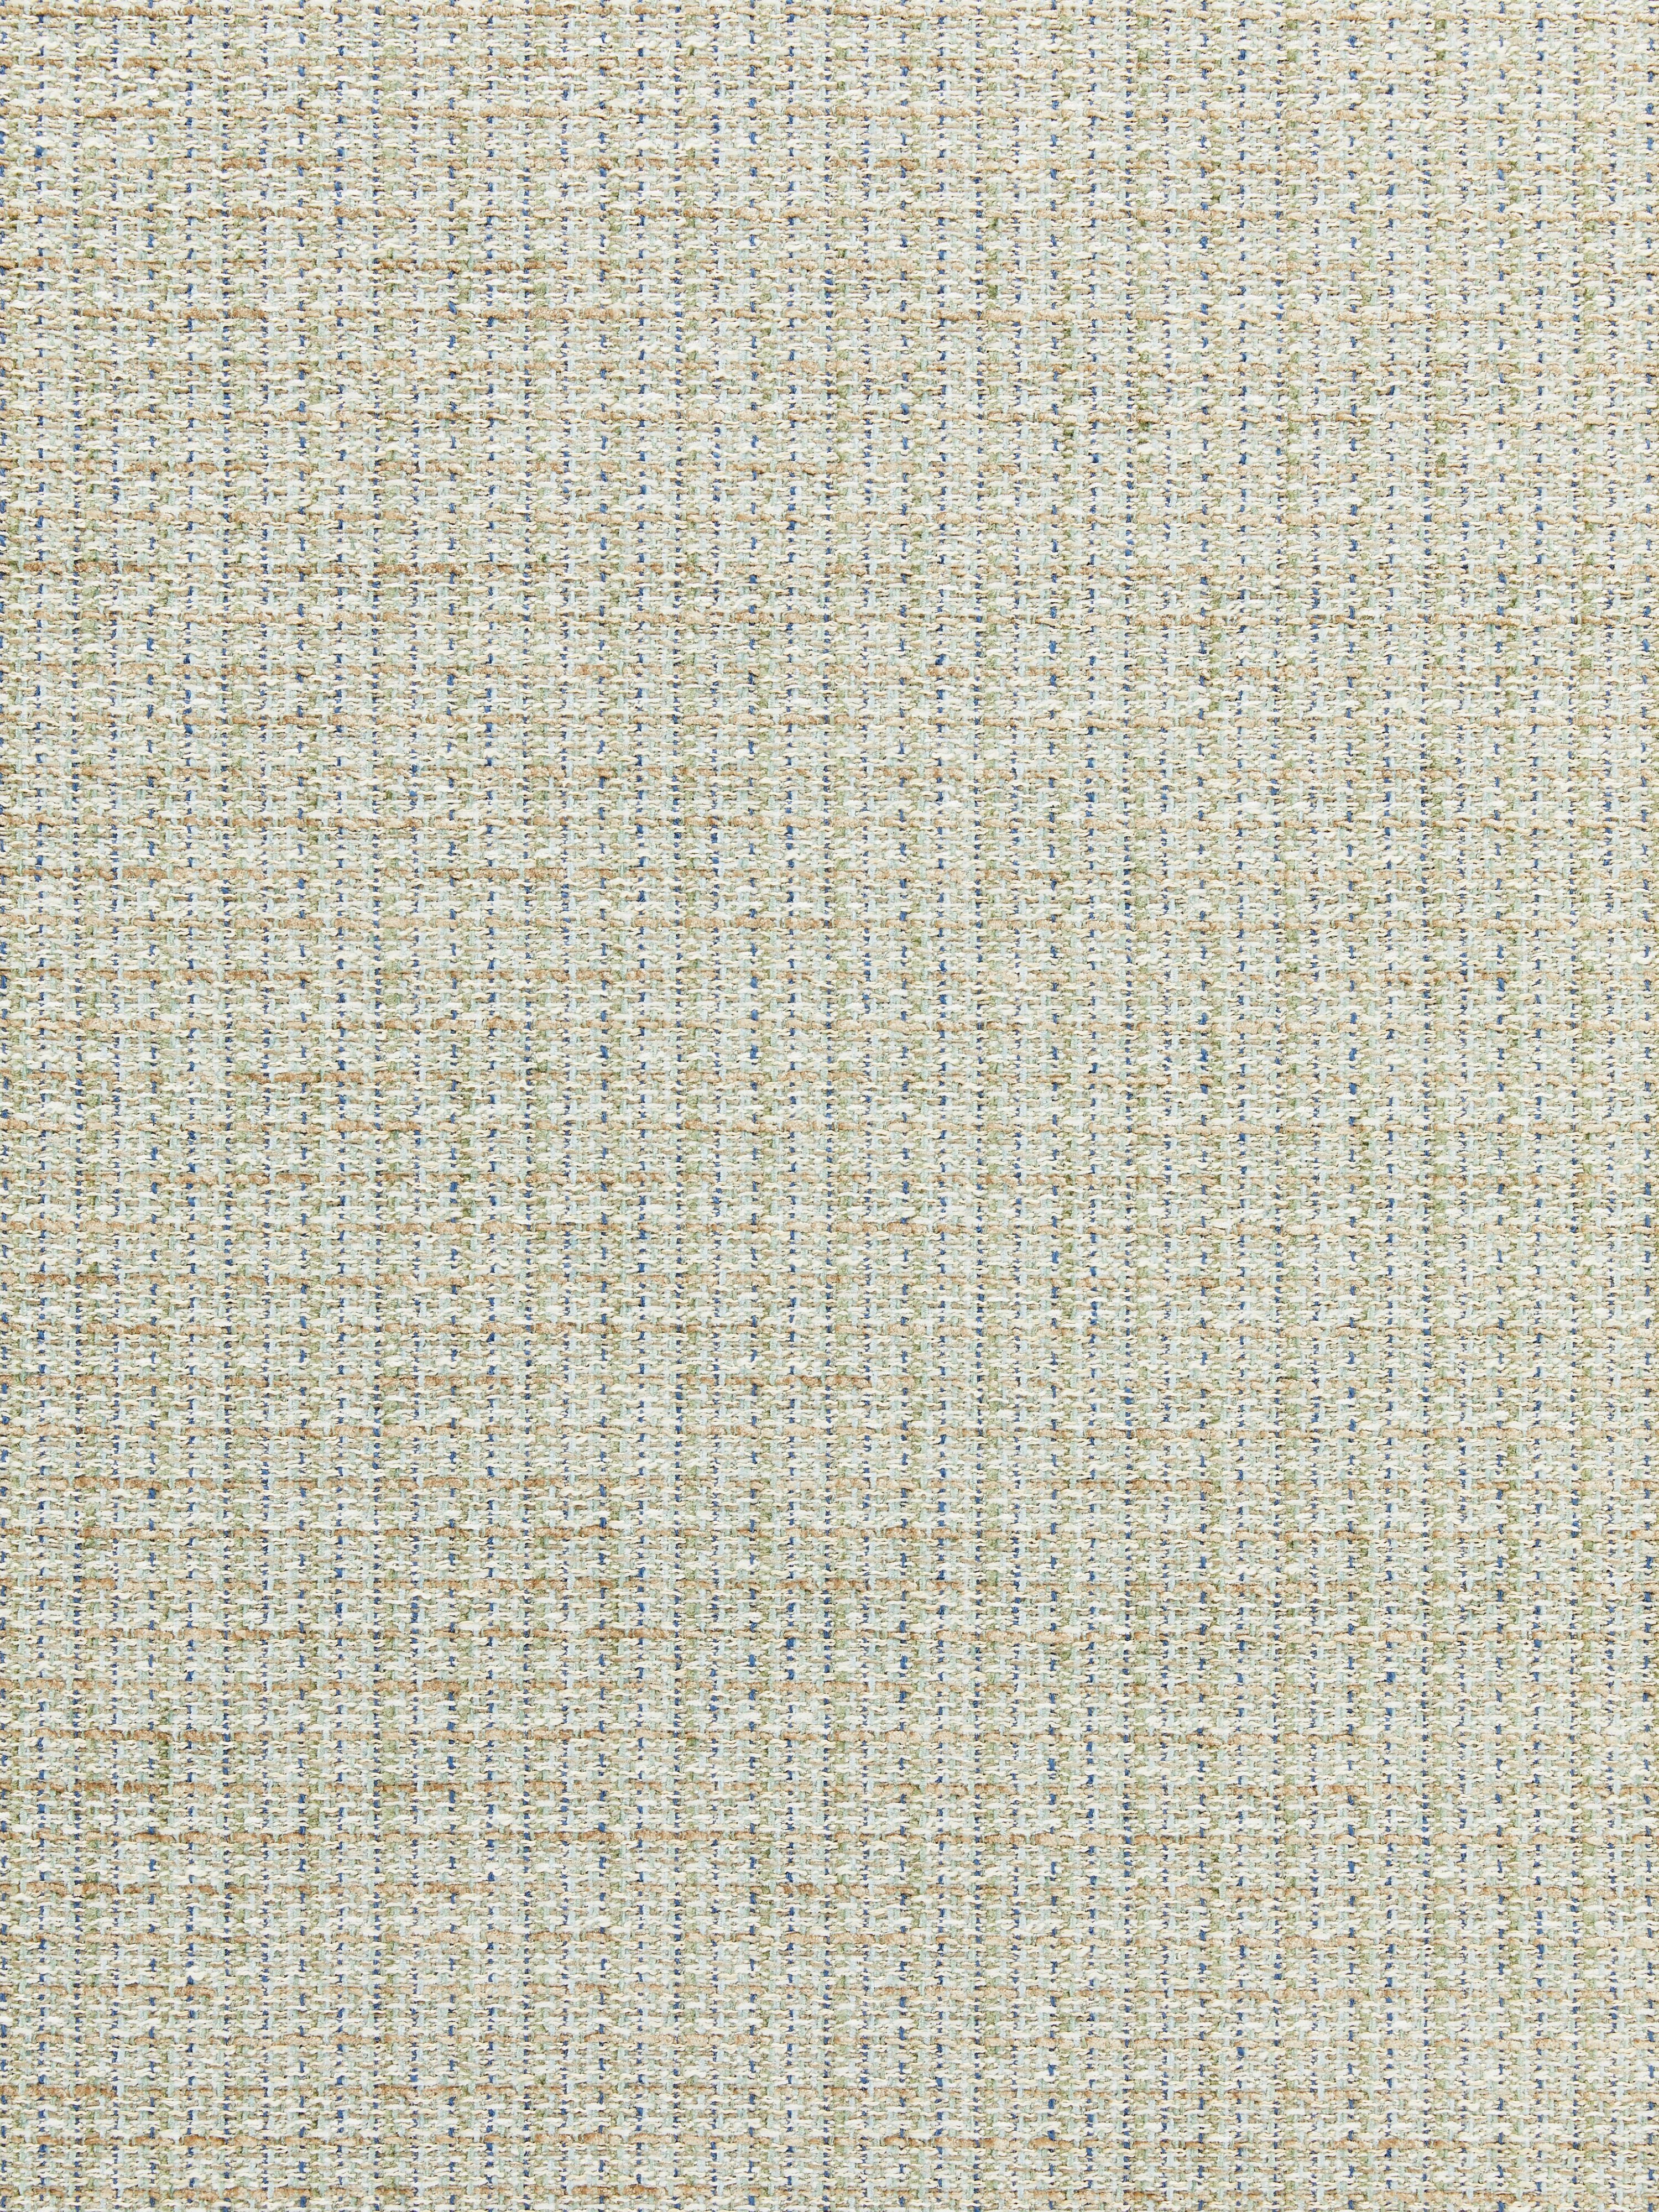 Highland Chenille fabric in seaglass color - pattern number SC 000227257 - by Scalamandre in the Scalamandre Fabrics Book 1 collection